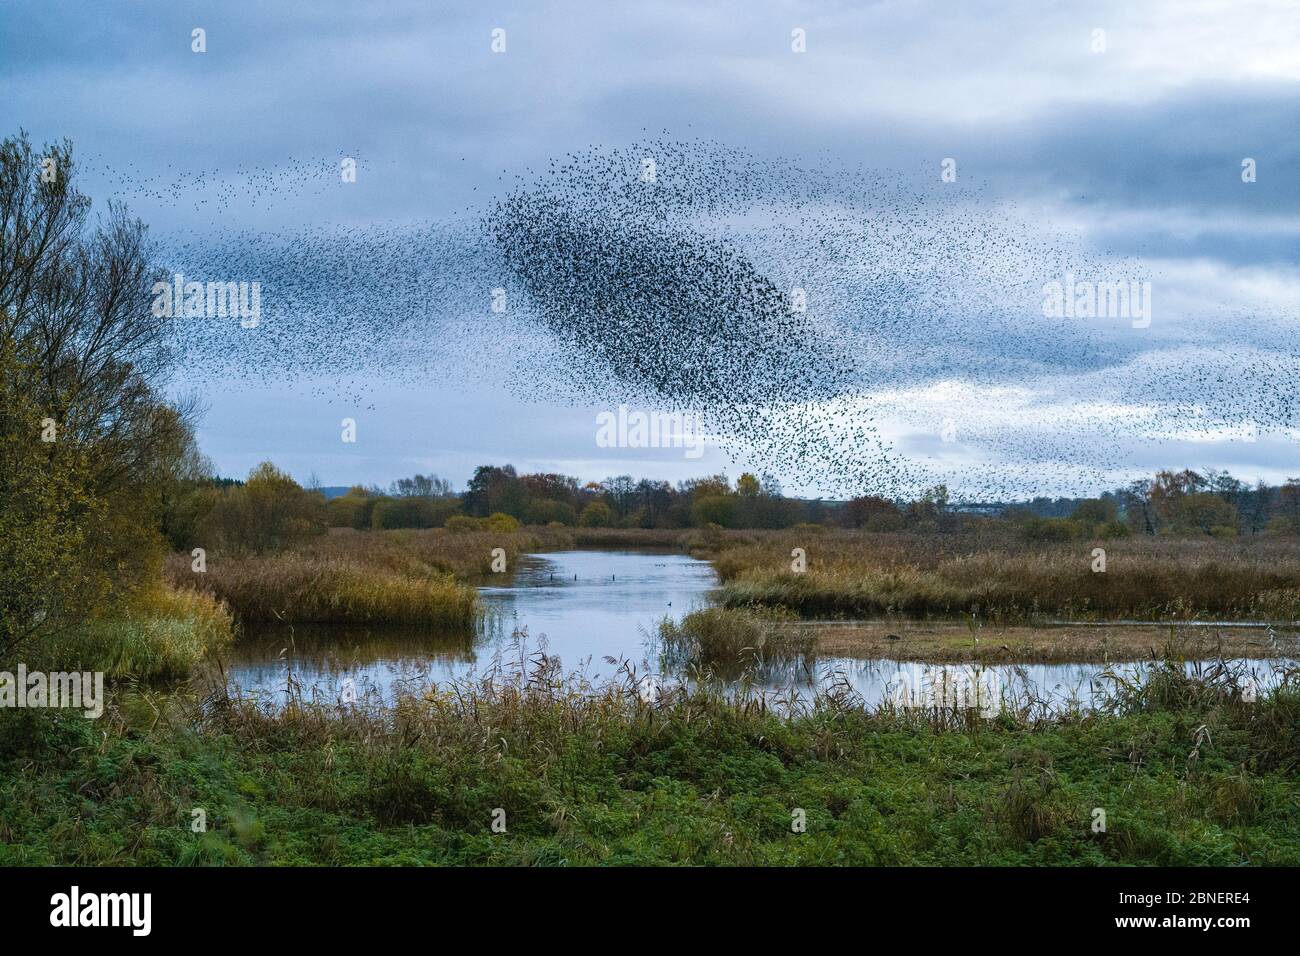 Murmuration of Starlings - Sturnus vulgaris. Thousands of birds form swirling shapes and patterns flocking together before roosting, Avalon Marshes, S Stock Photo